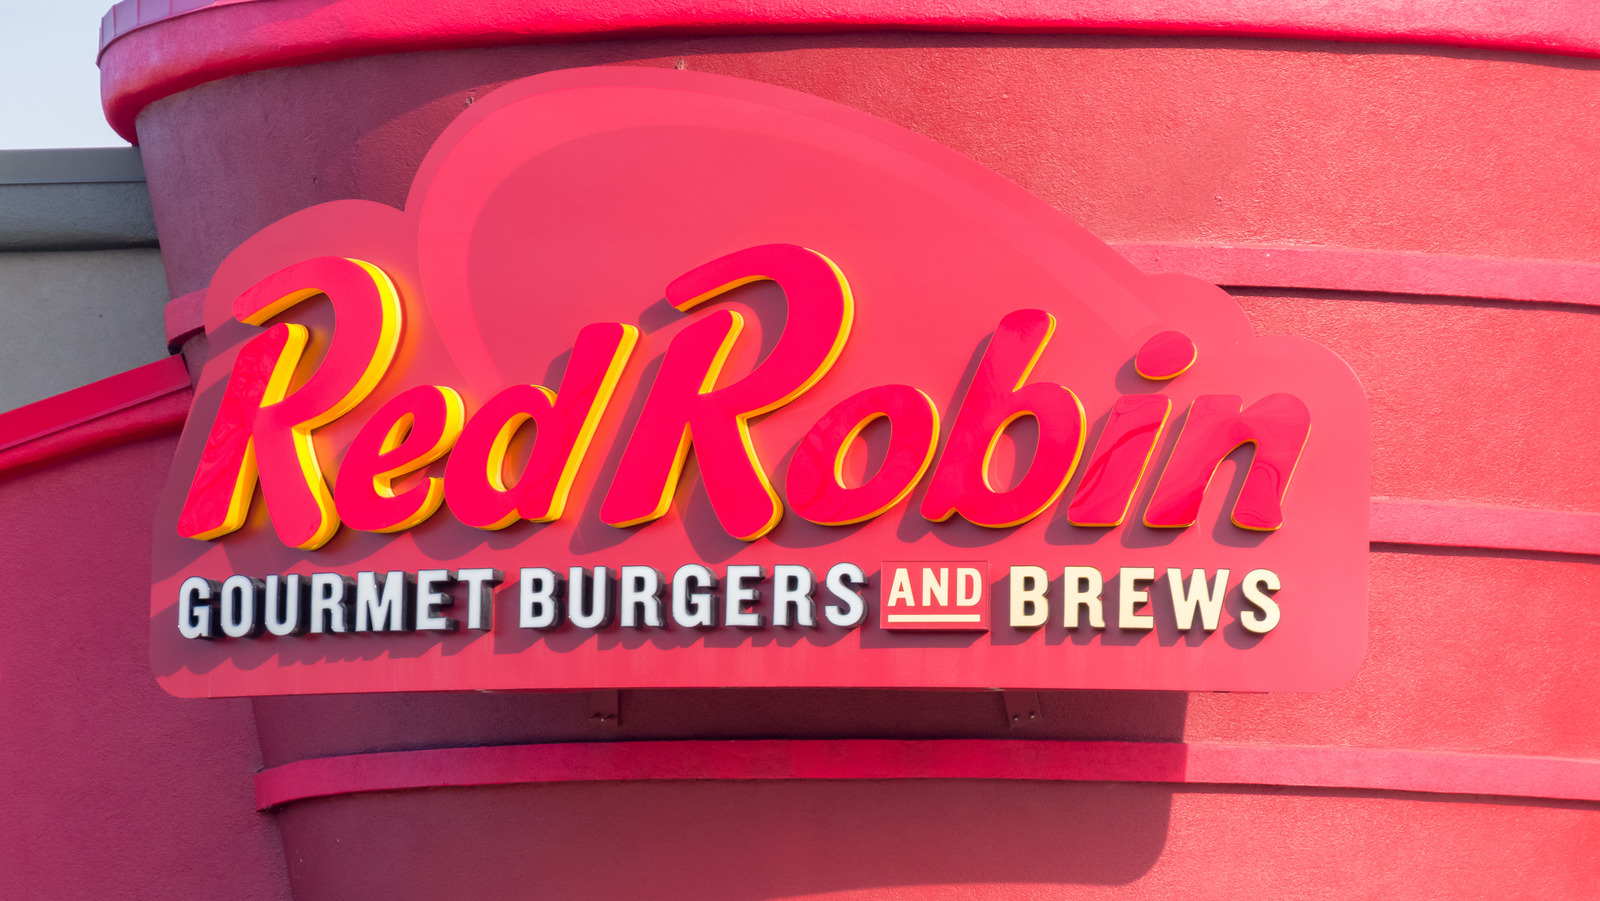 https://www.mashed.com/img/gallery/red-robins-menu-just-got-a-whole-lot-spicier-with-its-new-scorpion-burger/l-intro-1626554778.jpg